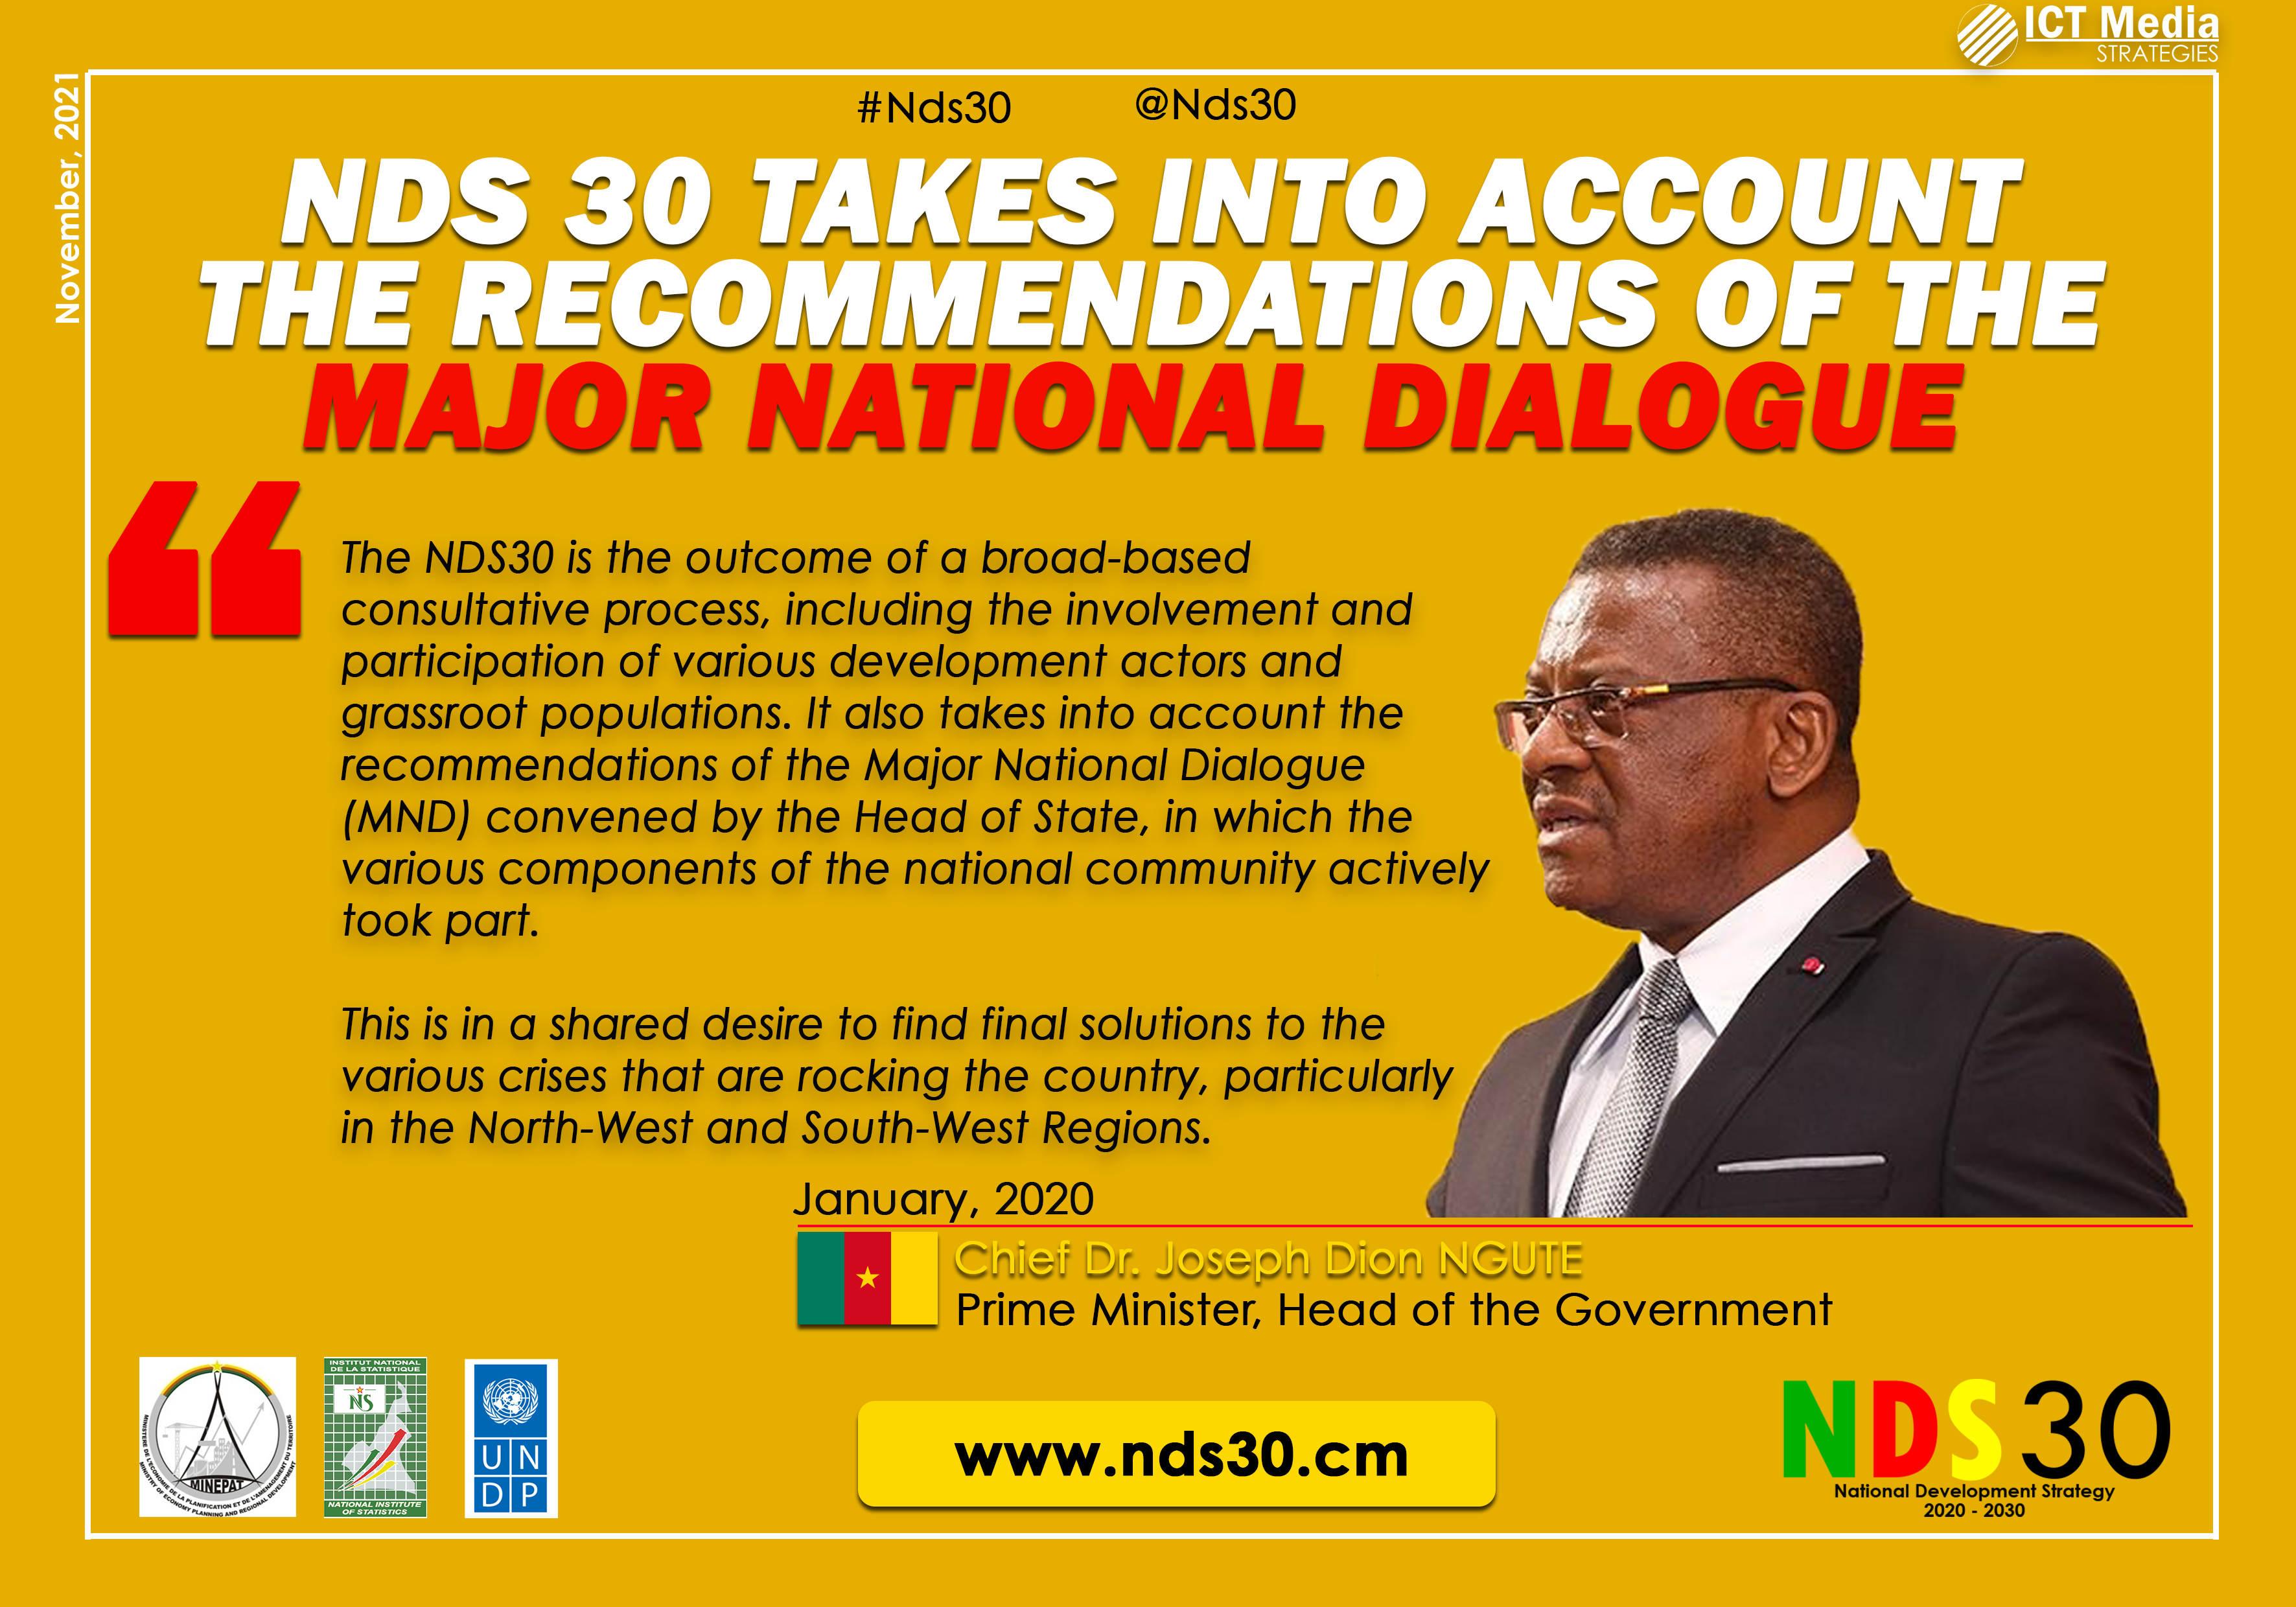 Joseph Dion Ngute and the NDS 30